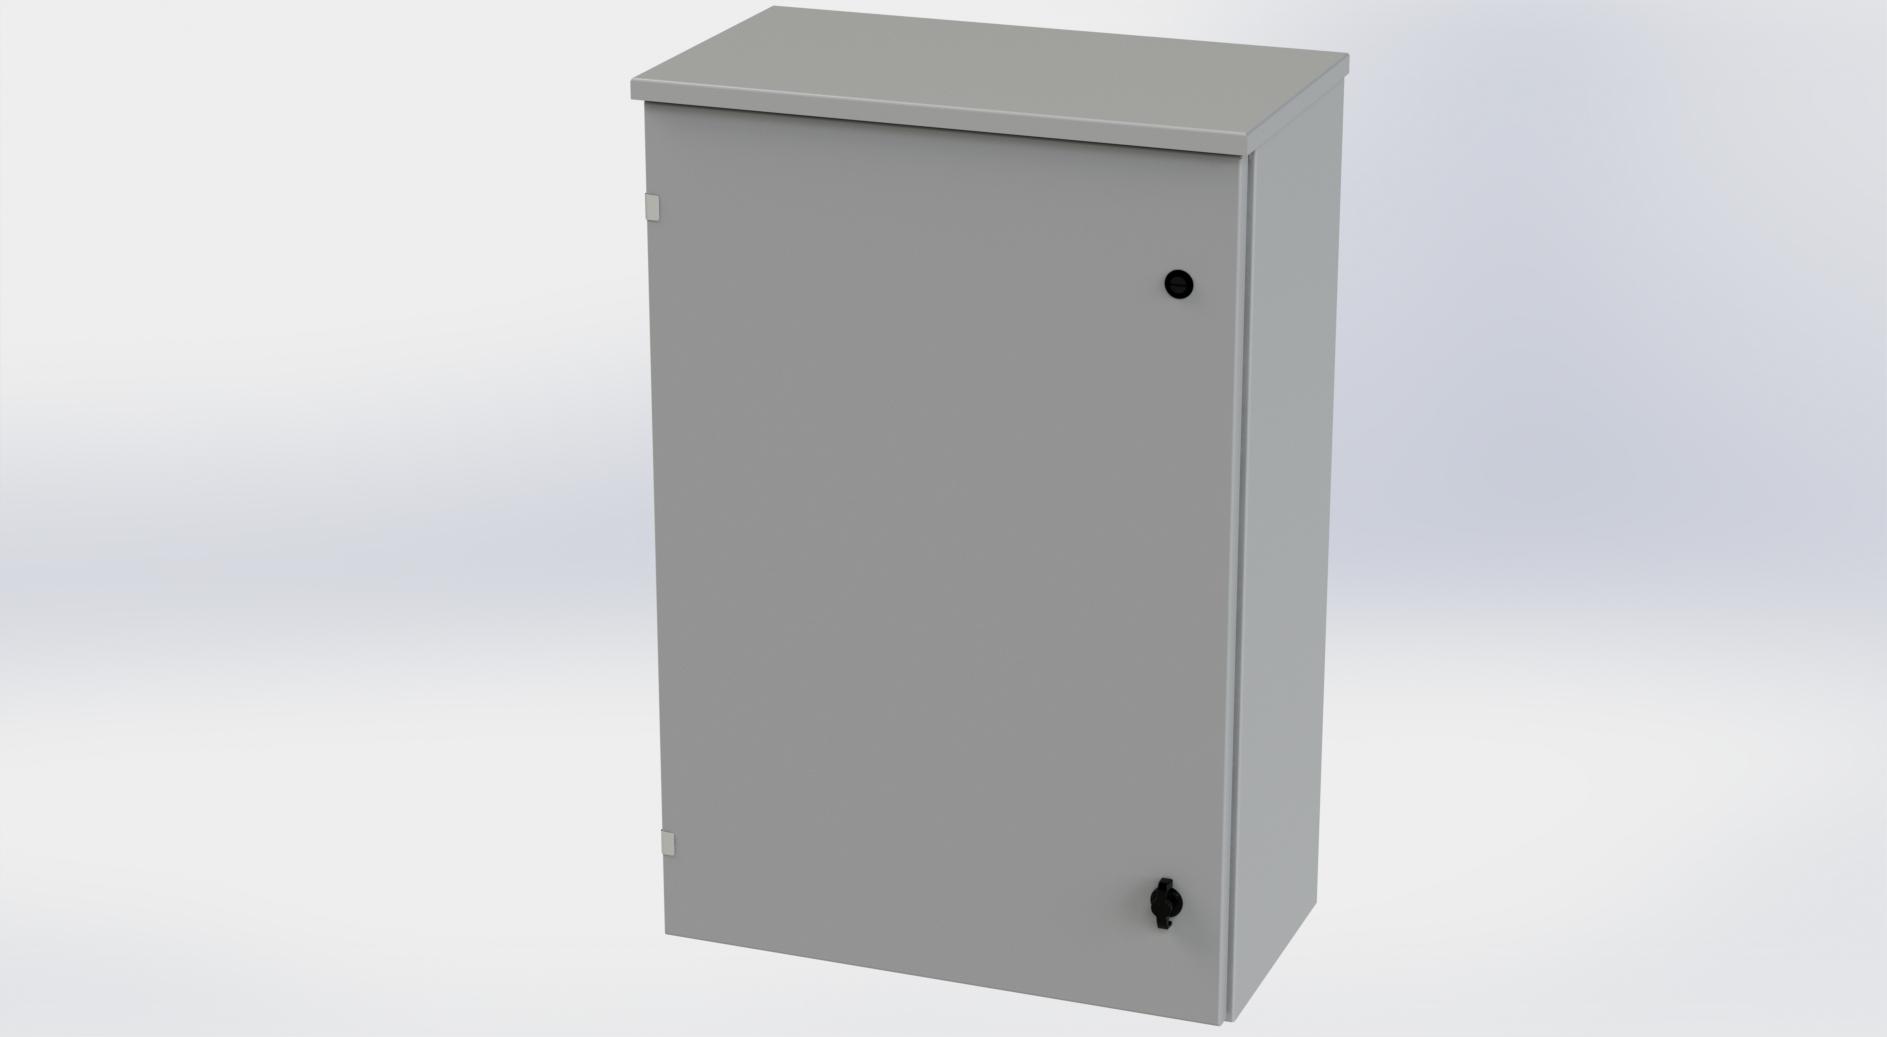 Saginaw Control SCE-36R2412LP Type-3R Hinged Cover Enclosure, Height:36.00", Width:24.00", Depth:12.00", ANSI-61 gray powder coating inside and out. Optional sub-panels are powder coated white.